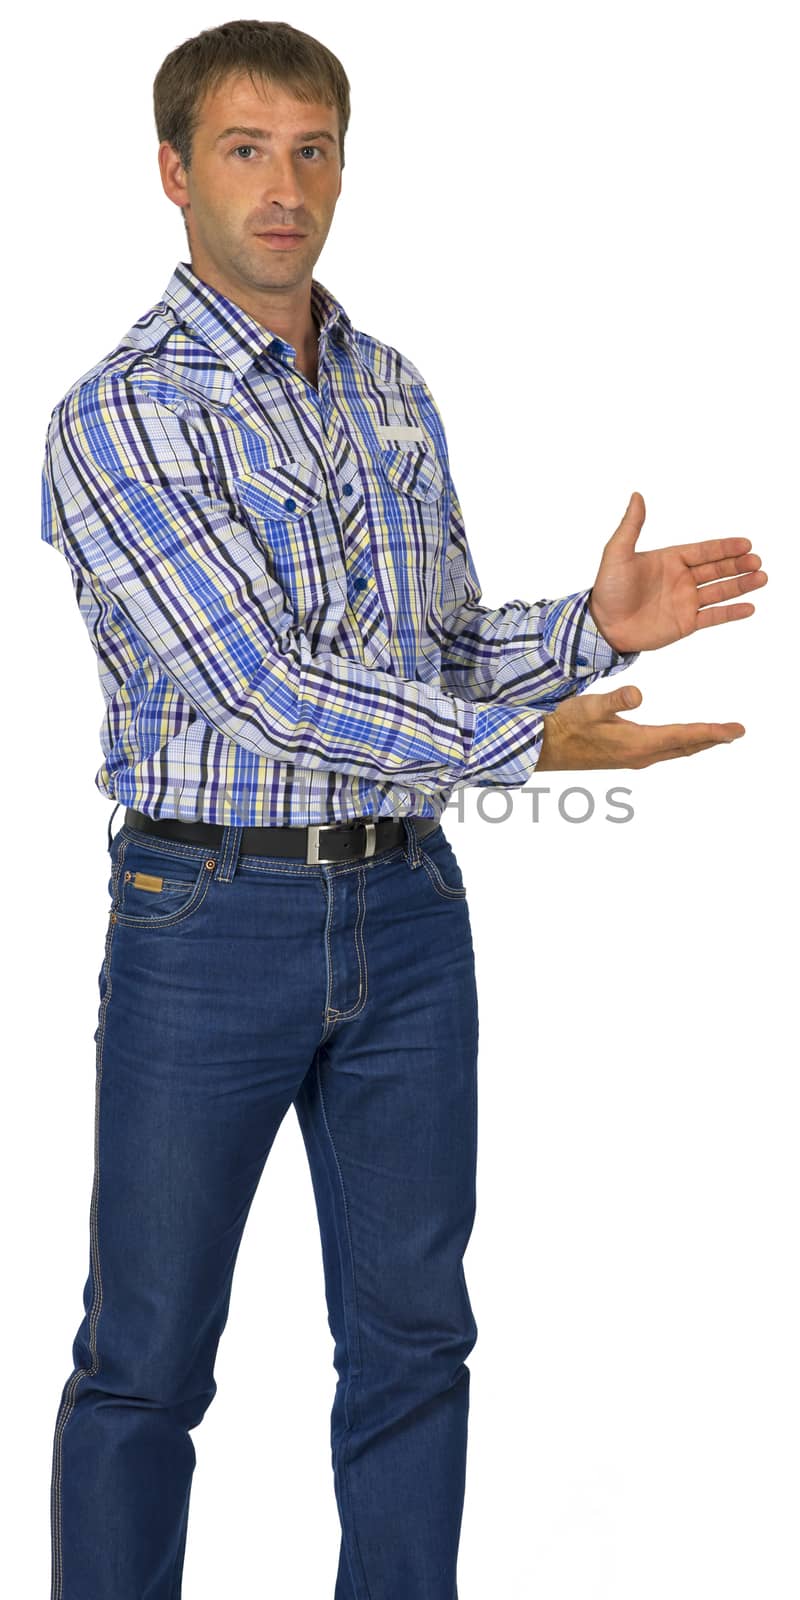 Portrait man holding hands in front of him. white background